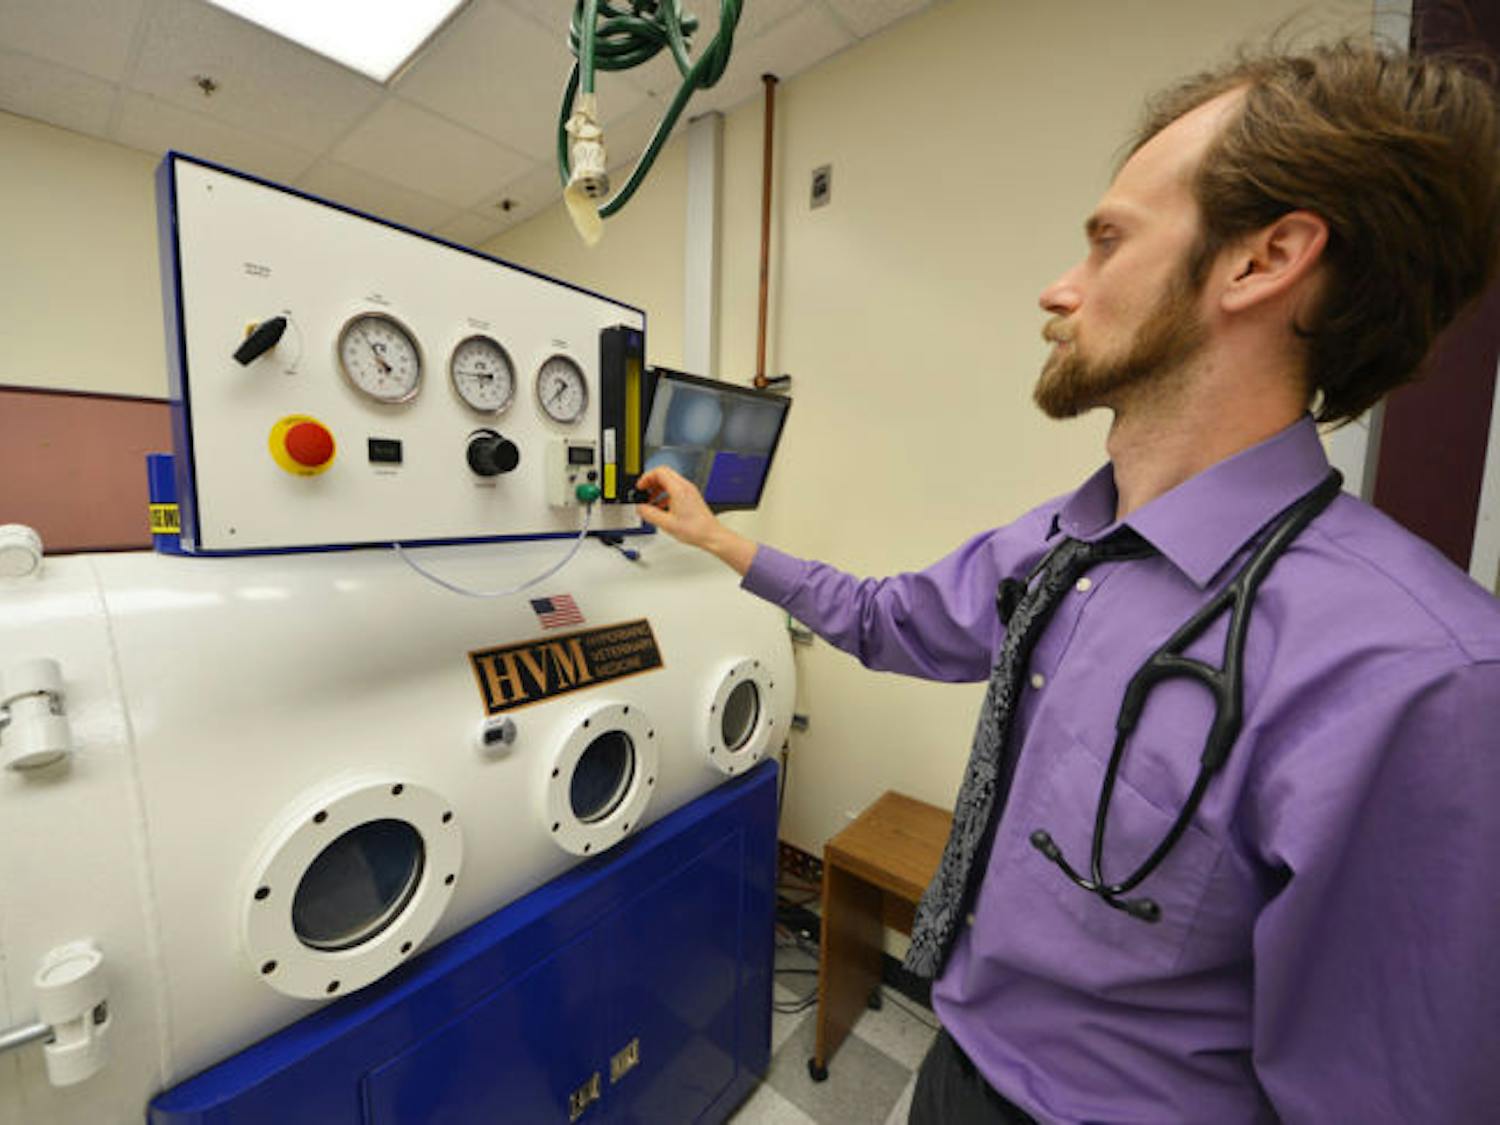 UF clinical assistant professor of integrative medicine Justin Shmalberg demonstrates how the hyperbaric chamber works at UF’s Small Animal Hospital on March 11.